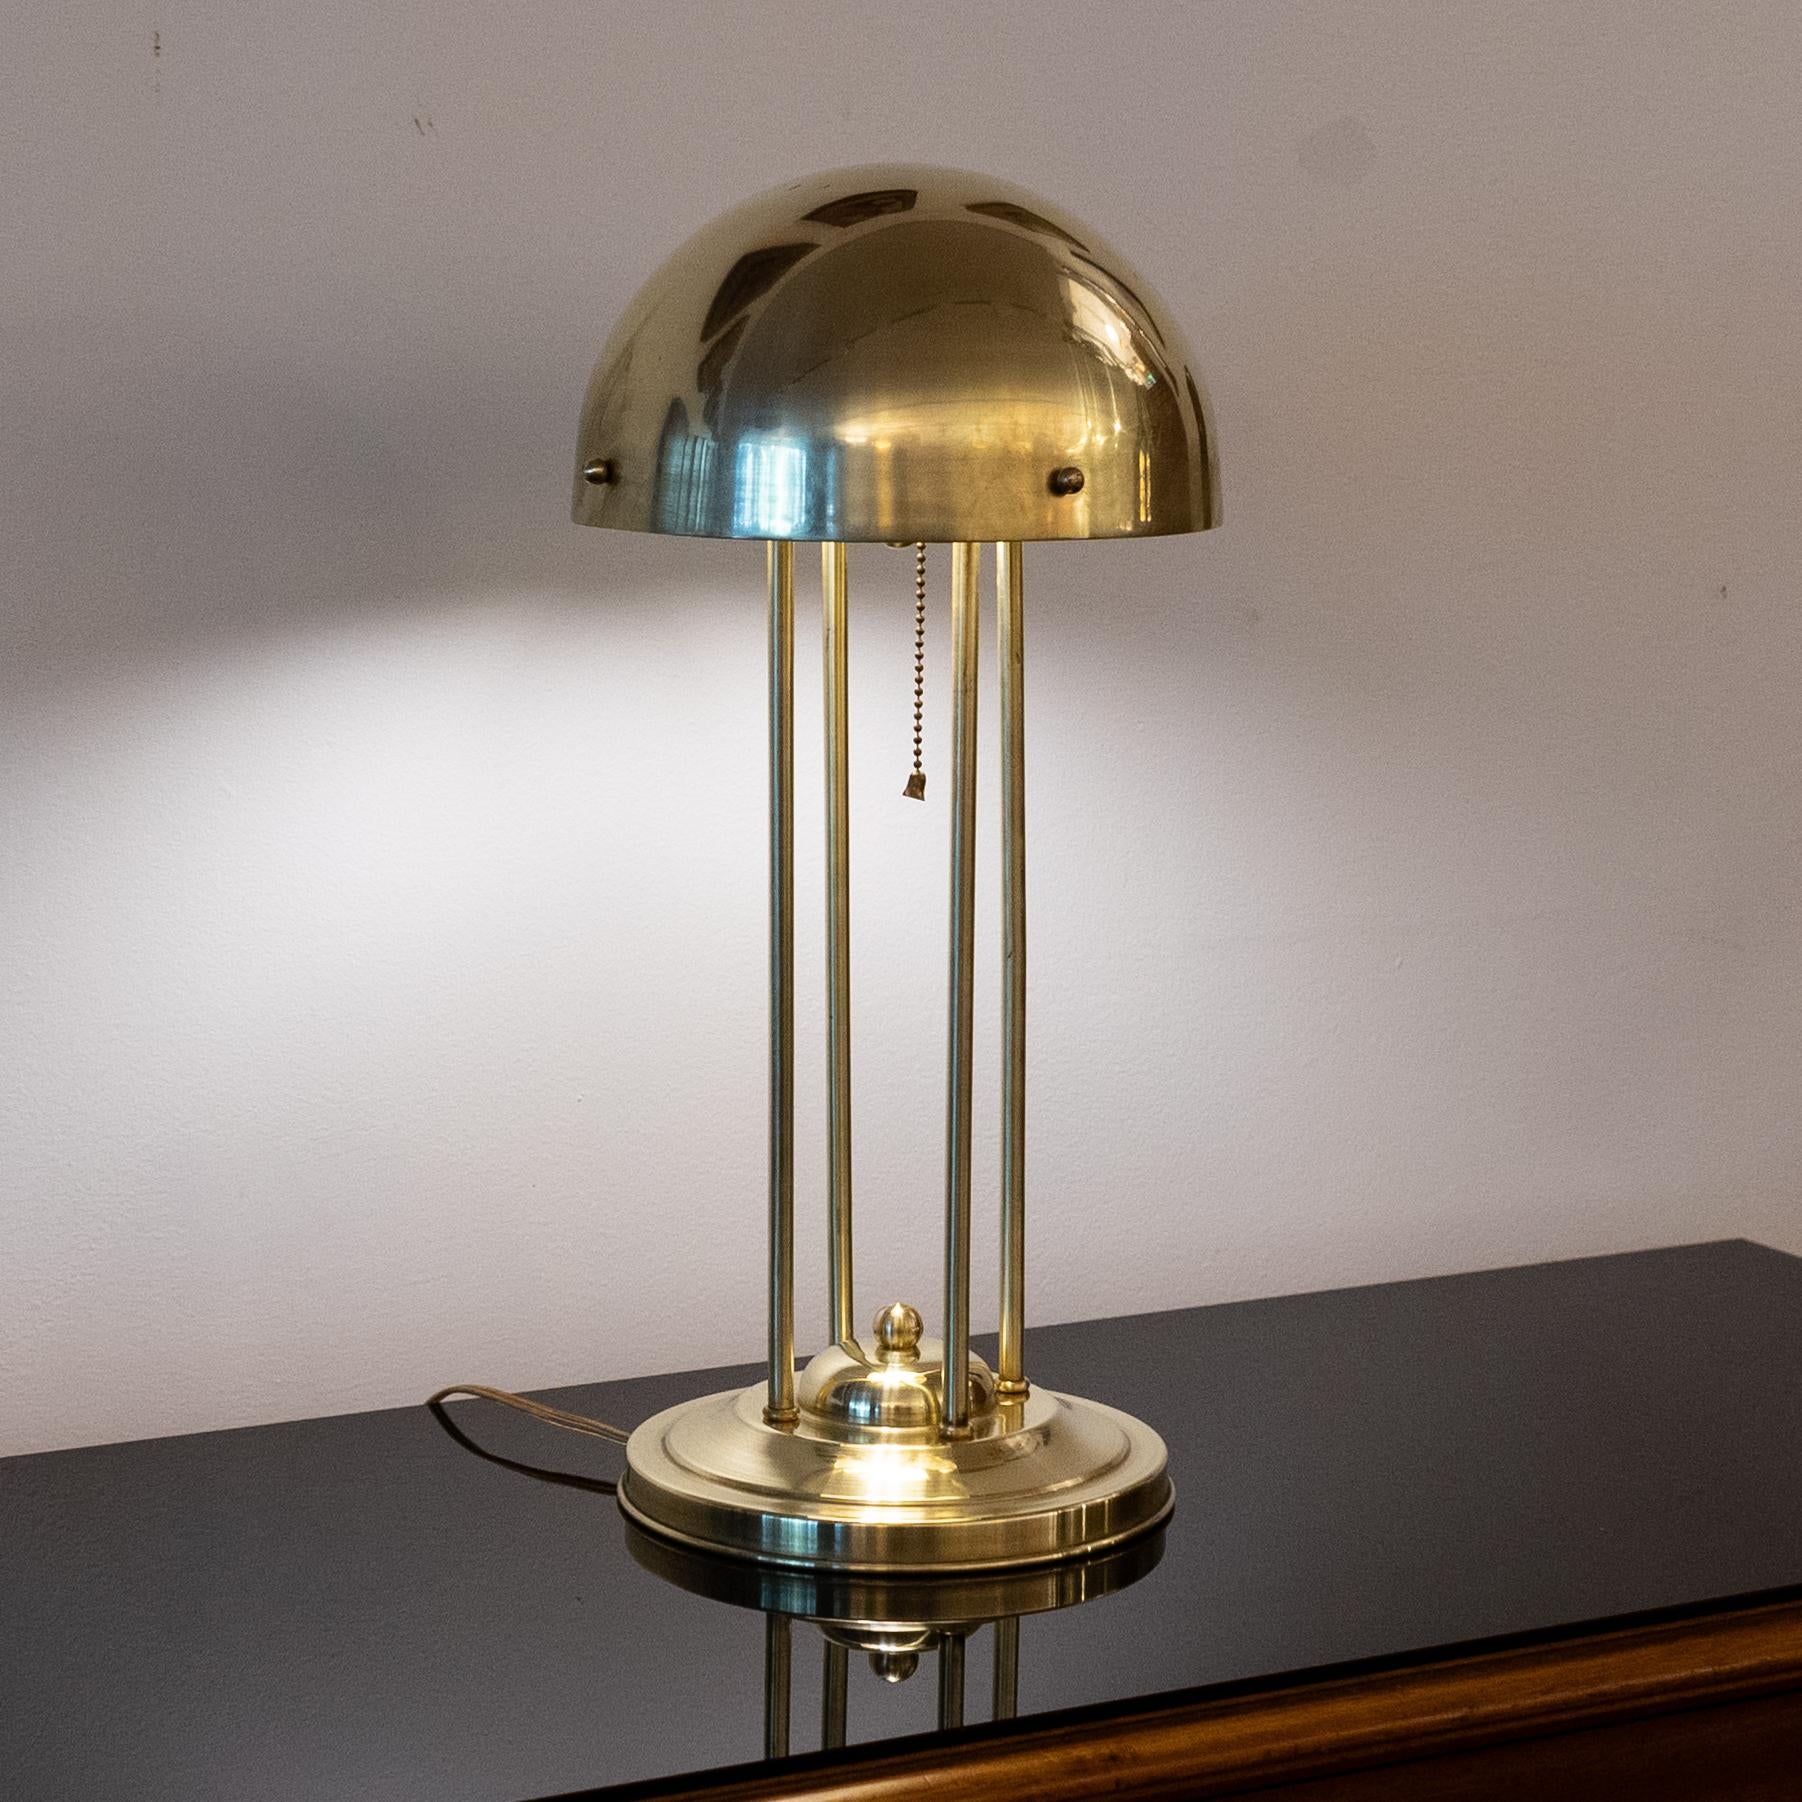 Art Nouveau table lamp designed for Haus Henneberg and designated HH1. Designed by Josef Hoffmann, 1902, Vienna, Austria. This is probably a later production from 1960s. 
Light fixture has been rewired for US and mounts one medium base A19